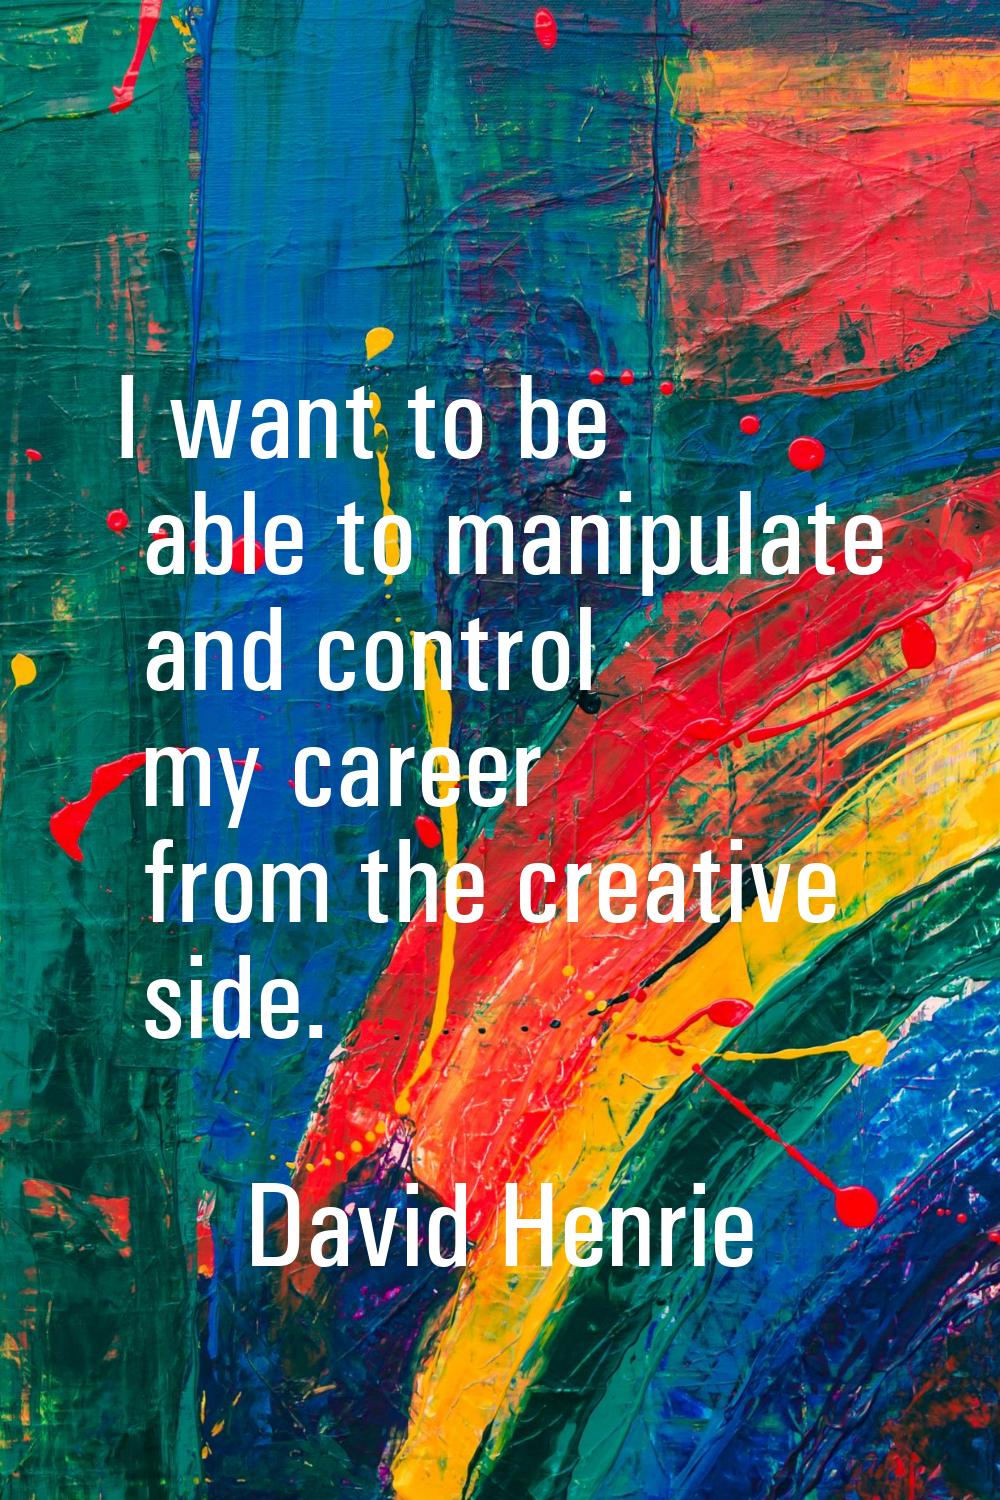 I want to be able to manipulate and control my career from the creative side.